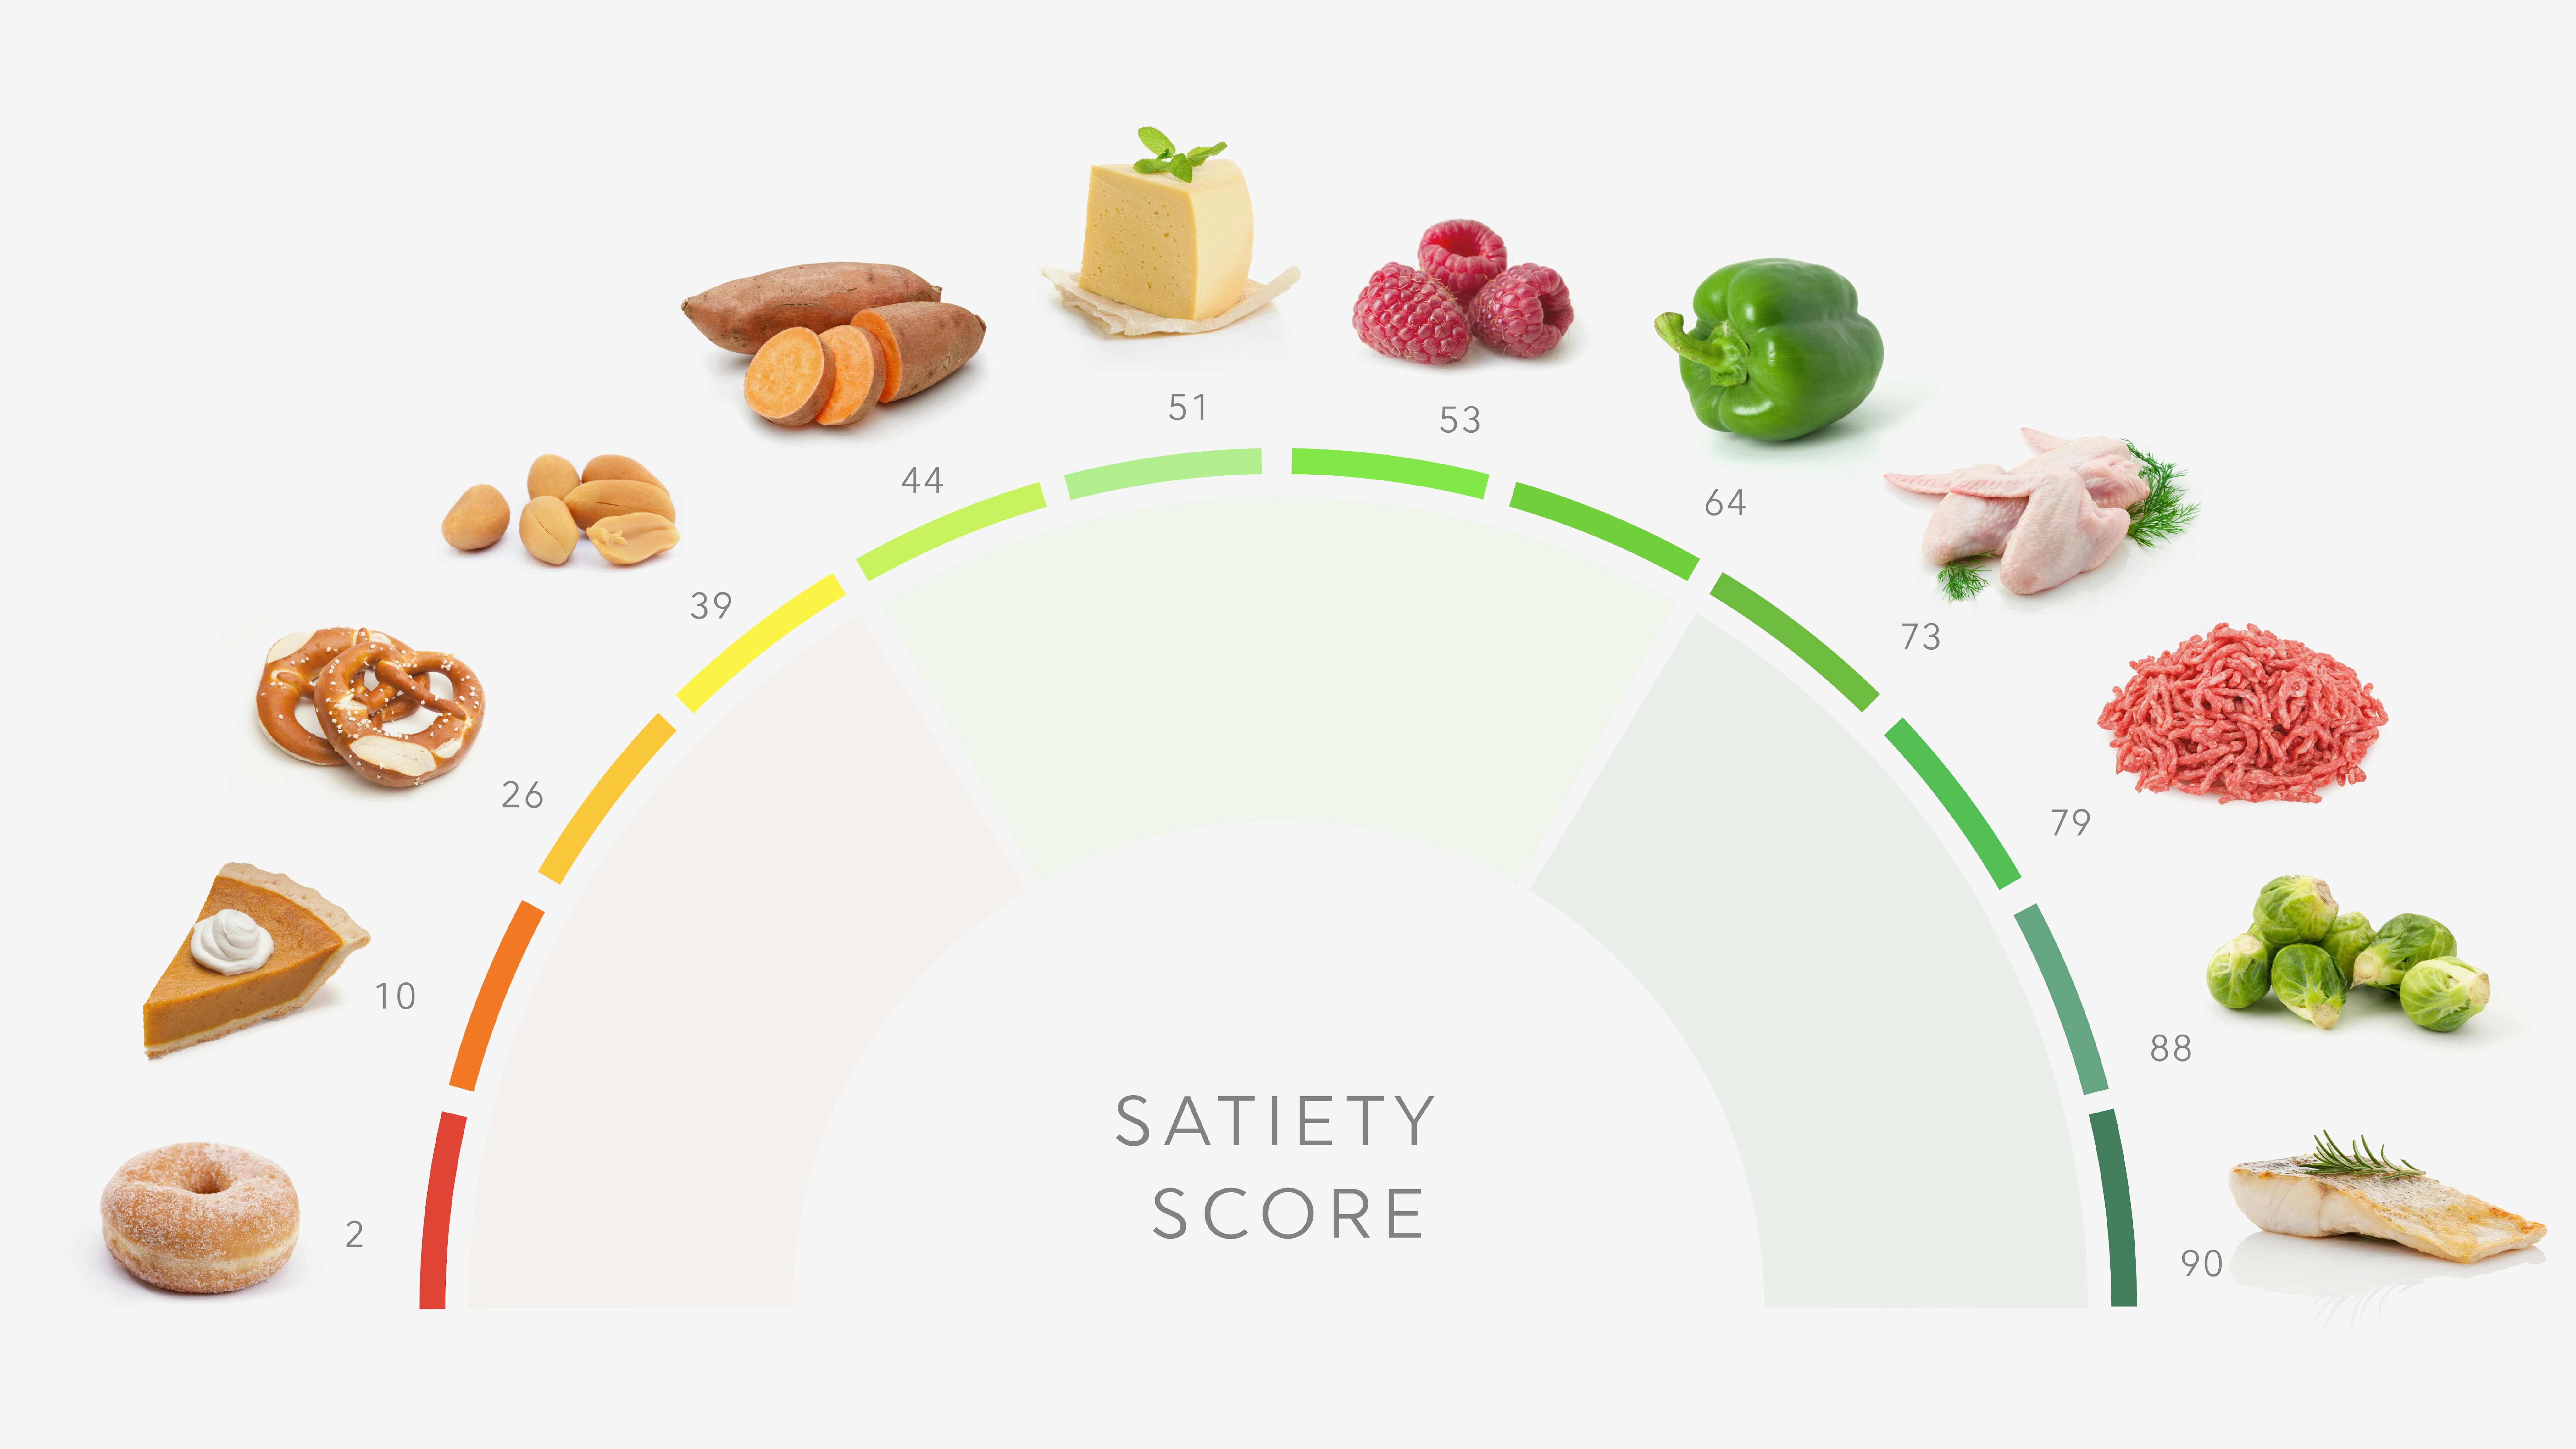 Satiety and meal satisfaction